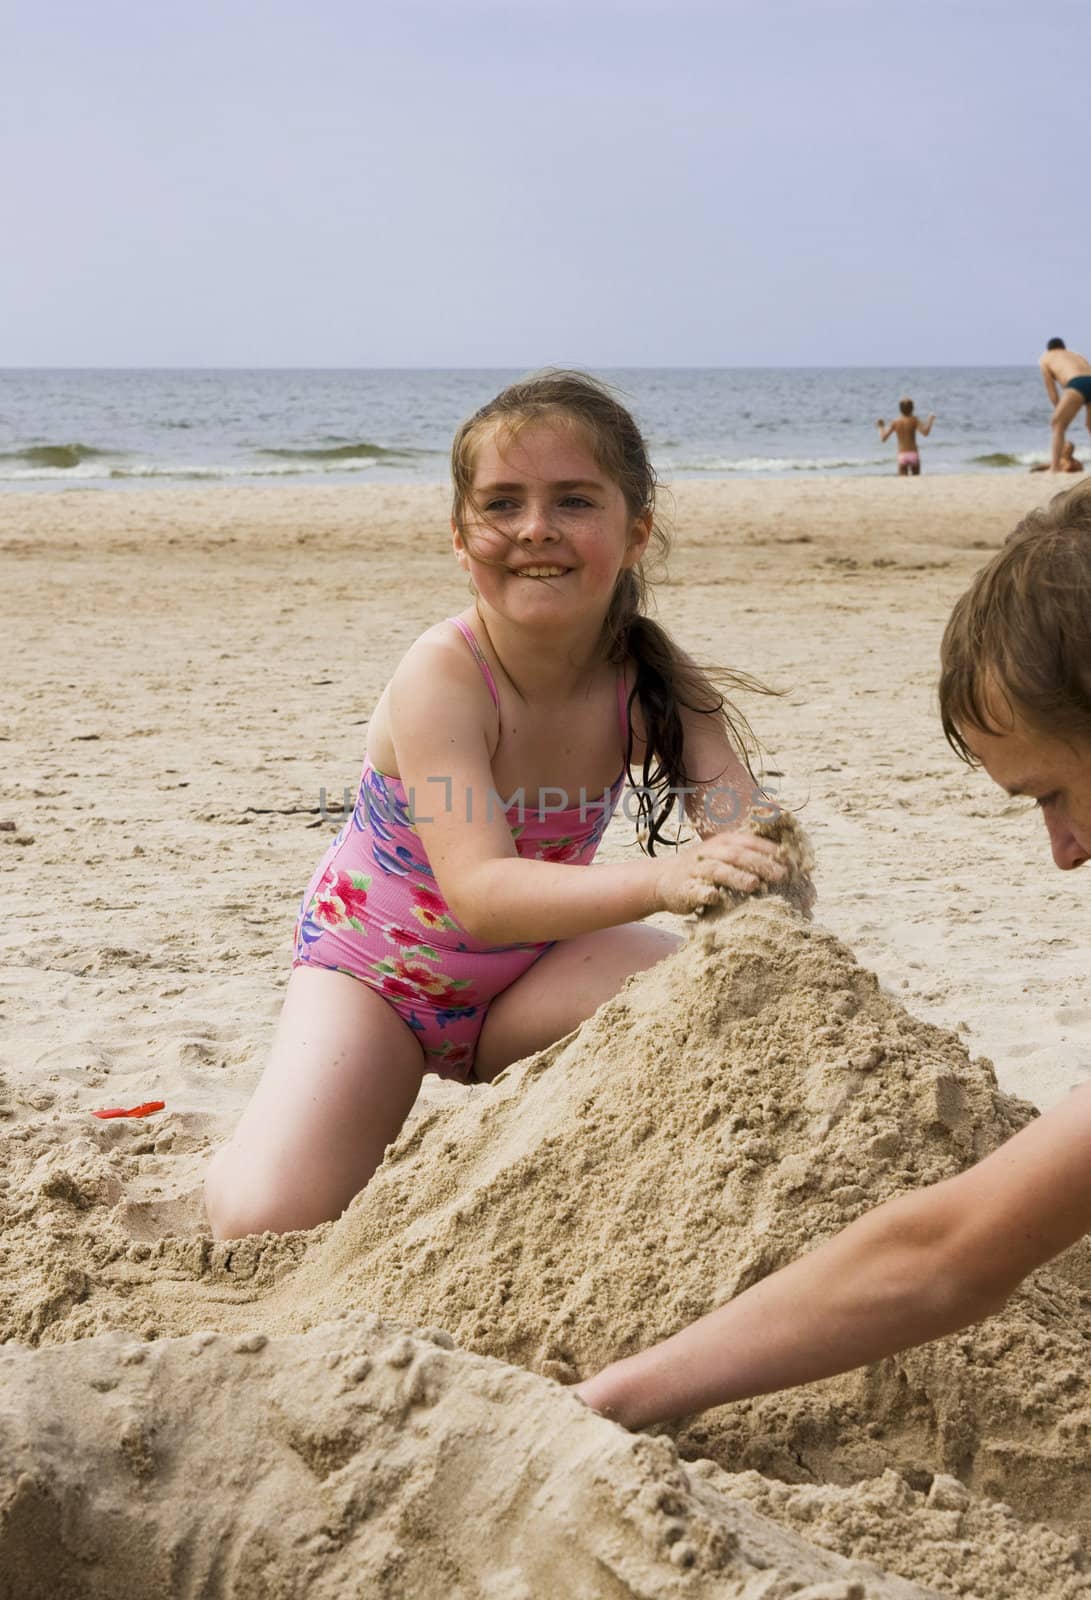 Happy smiling girl playing on beach sand. Lithuania, coast of Baltic sea